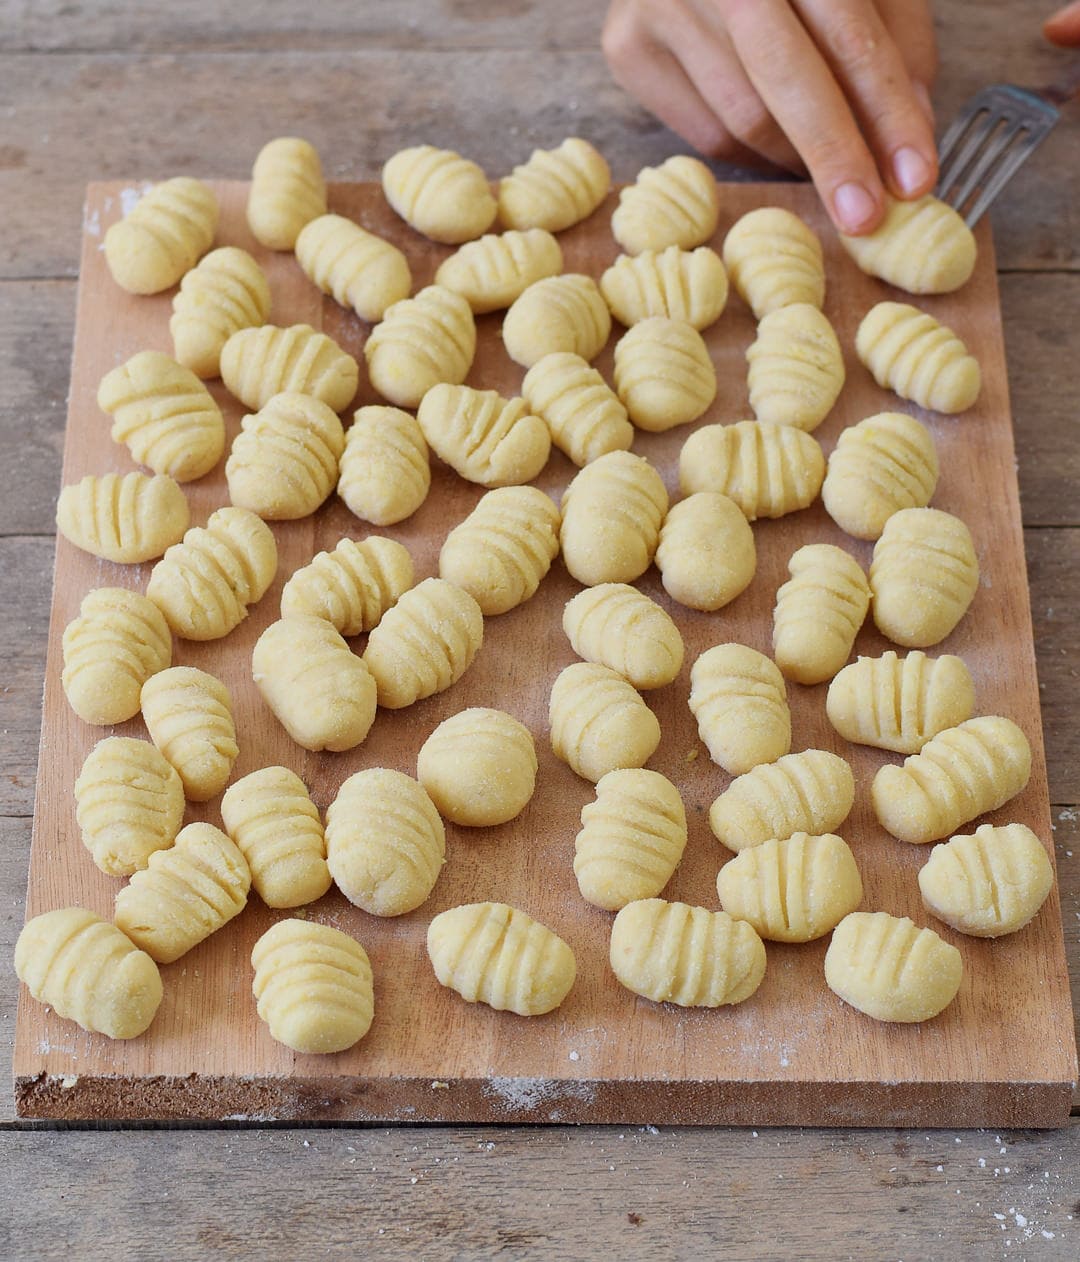 Homemade gluten-free vegan gnocchi before cooking on a cutting board